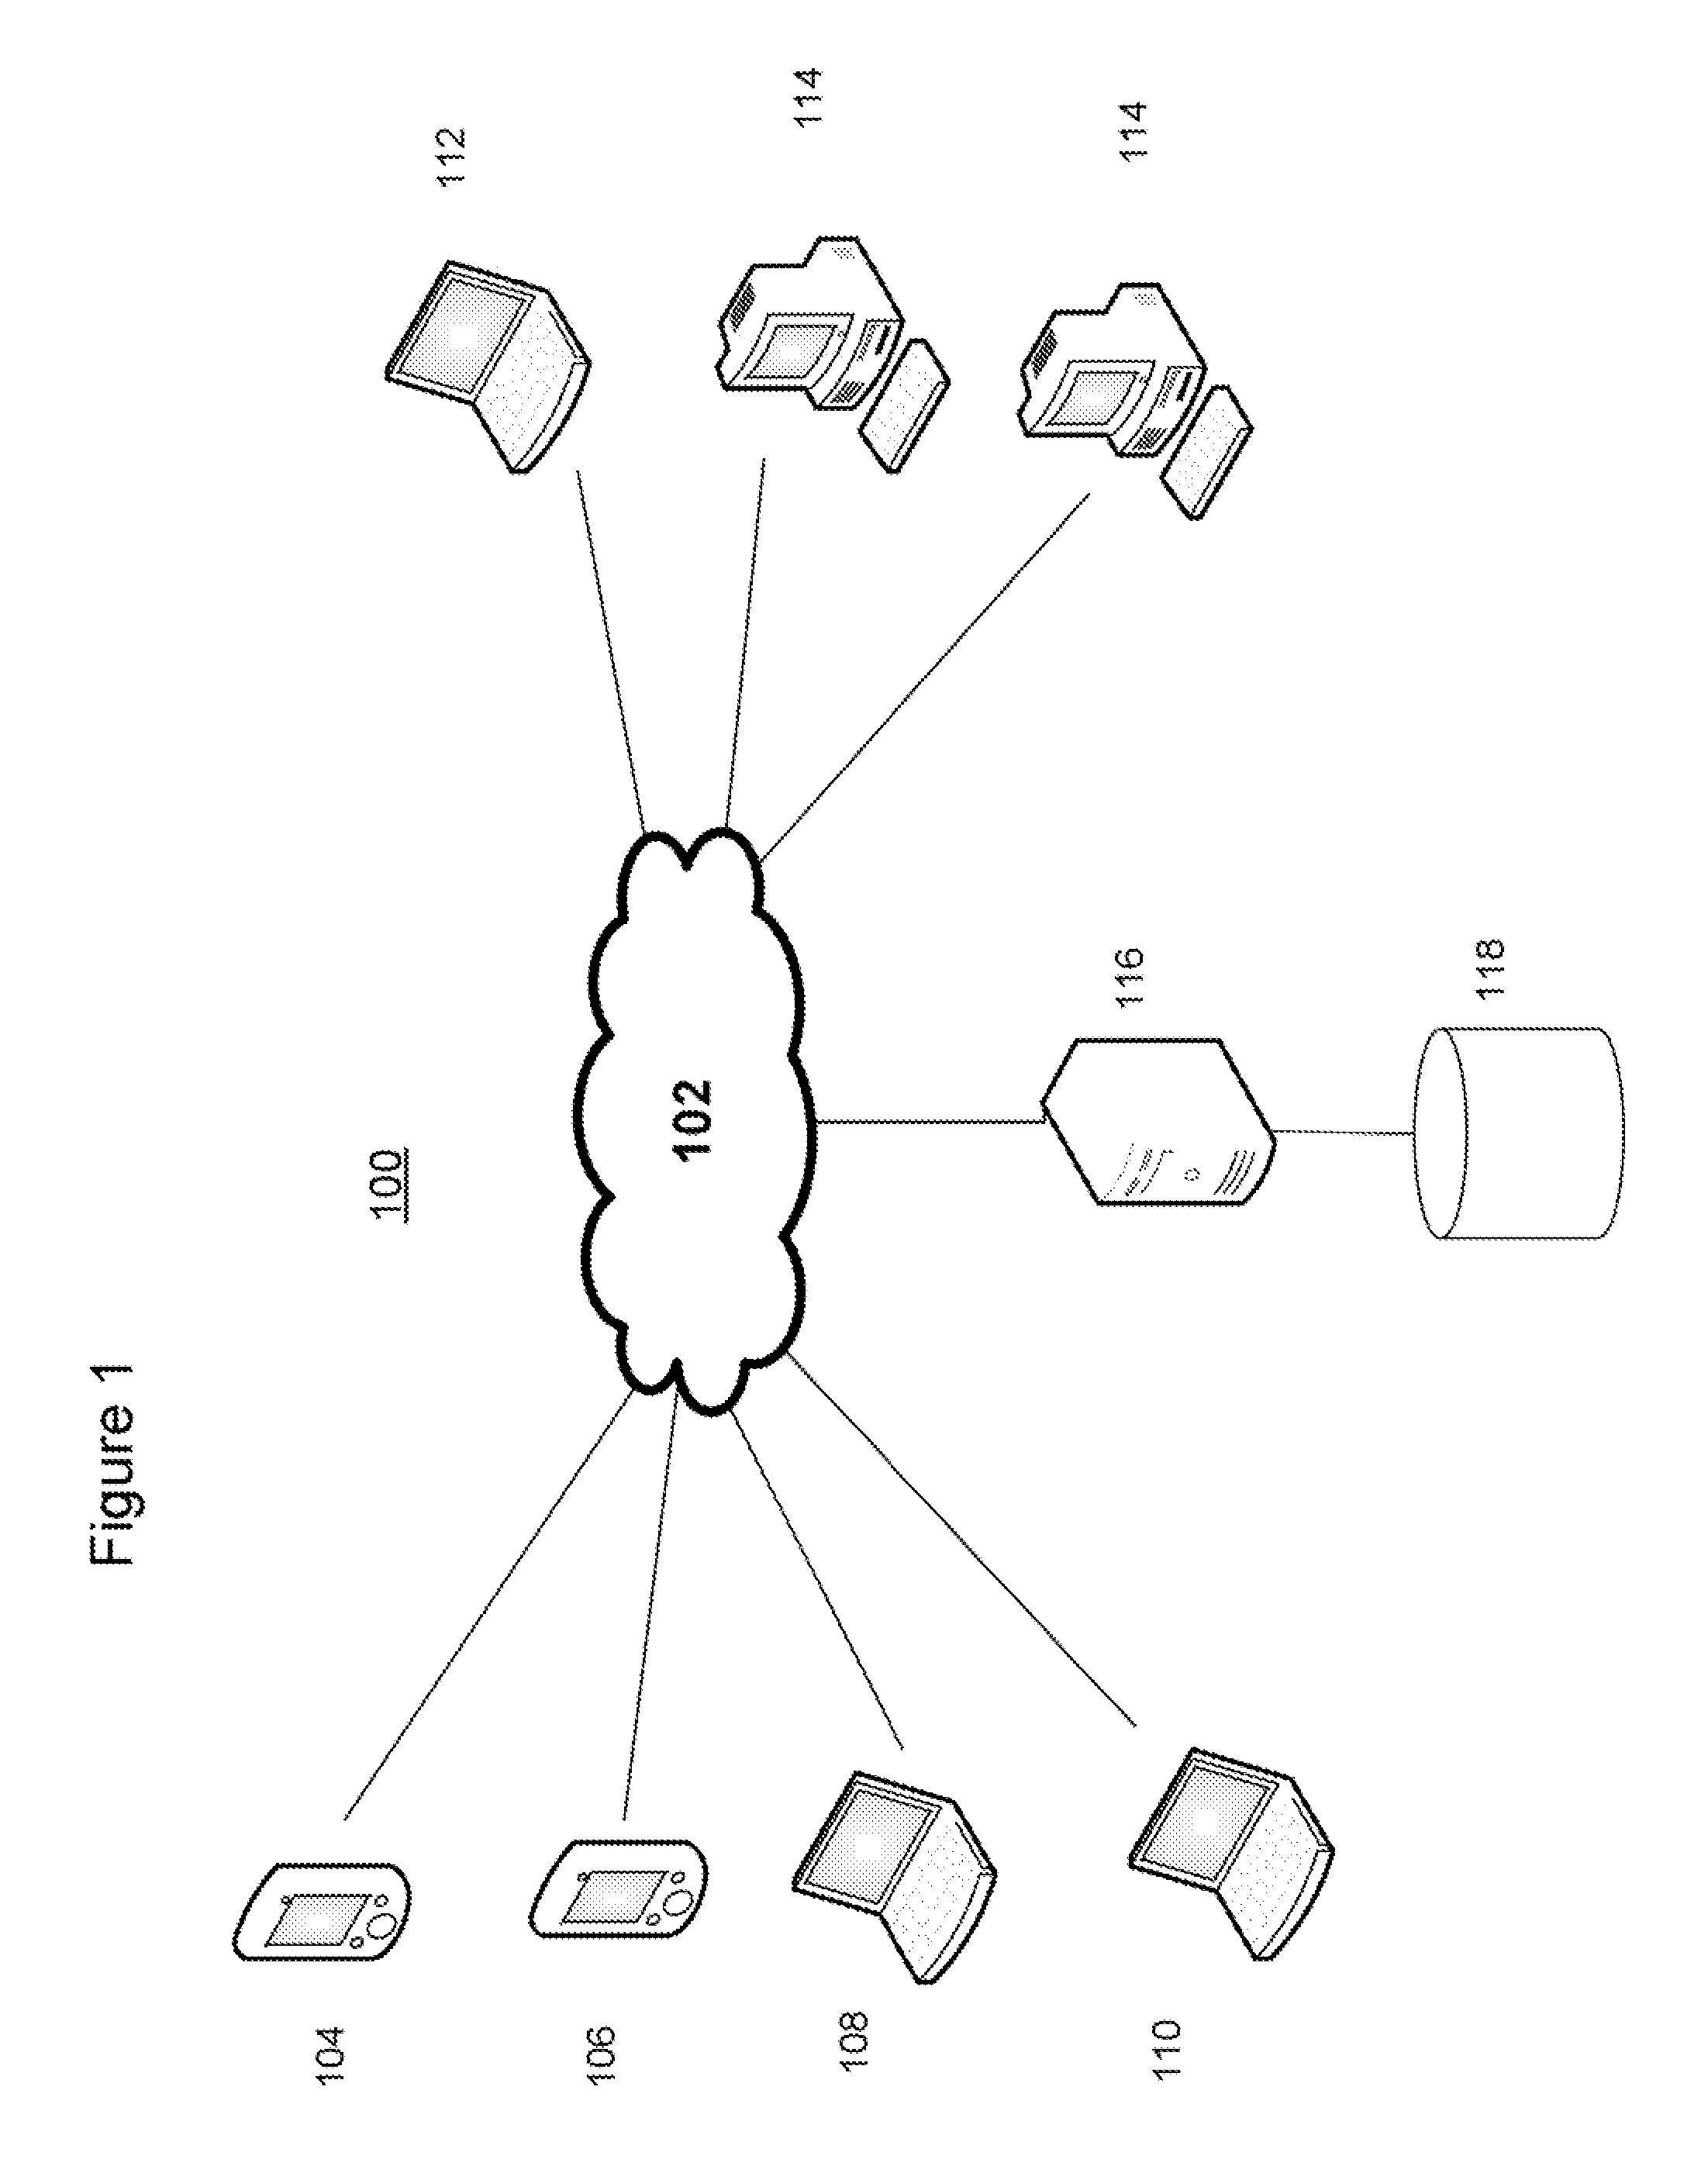 Method for Inspecting a Physical Asset